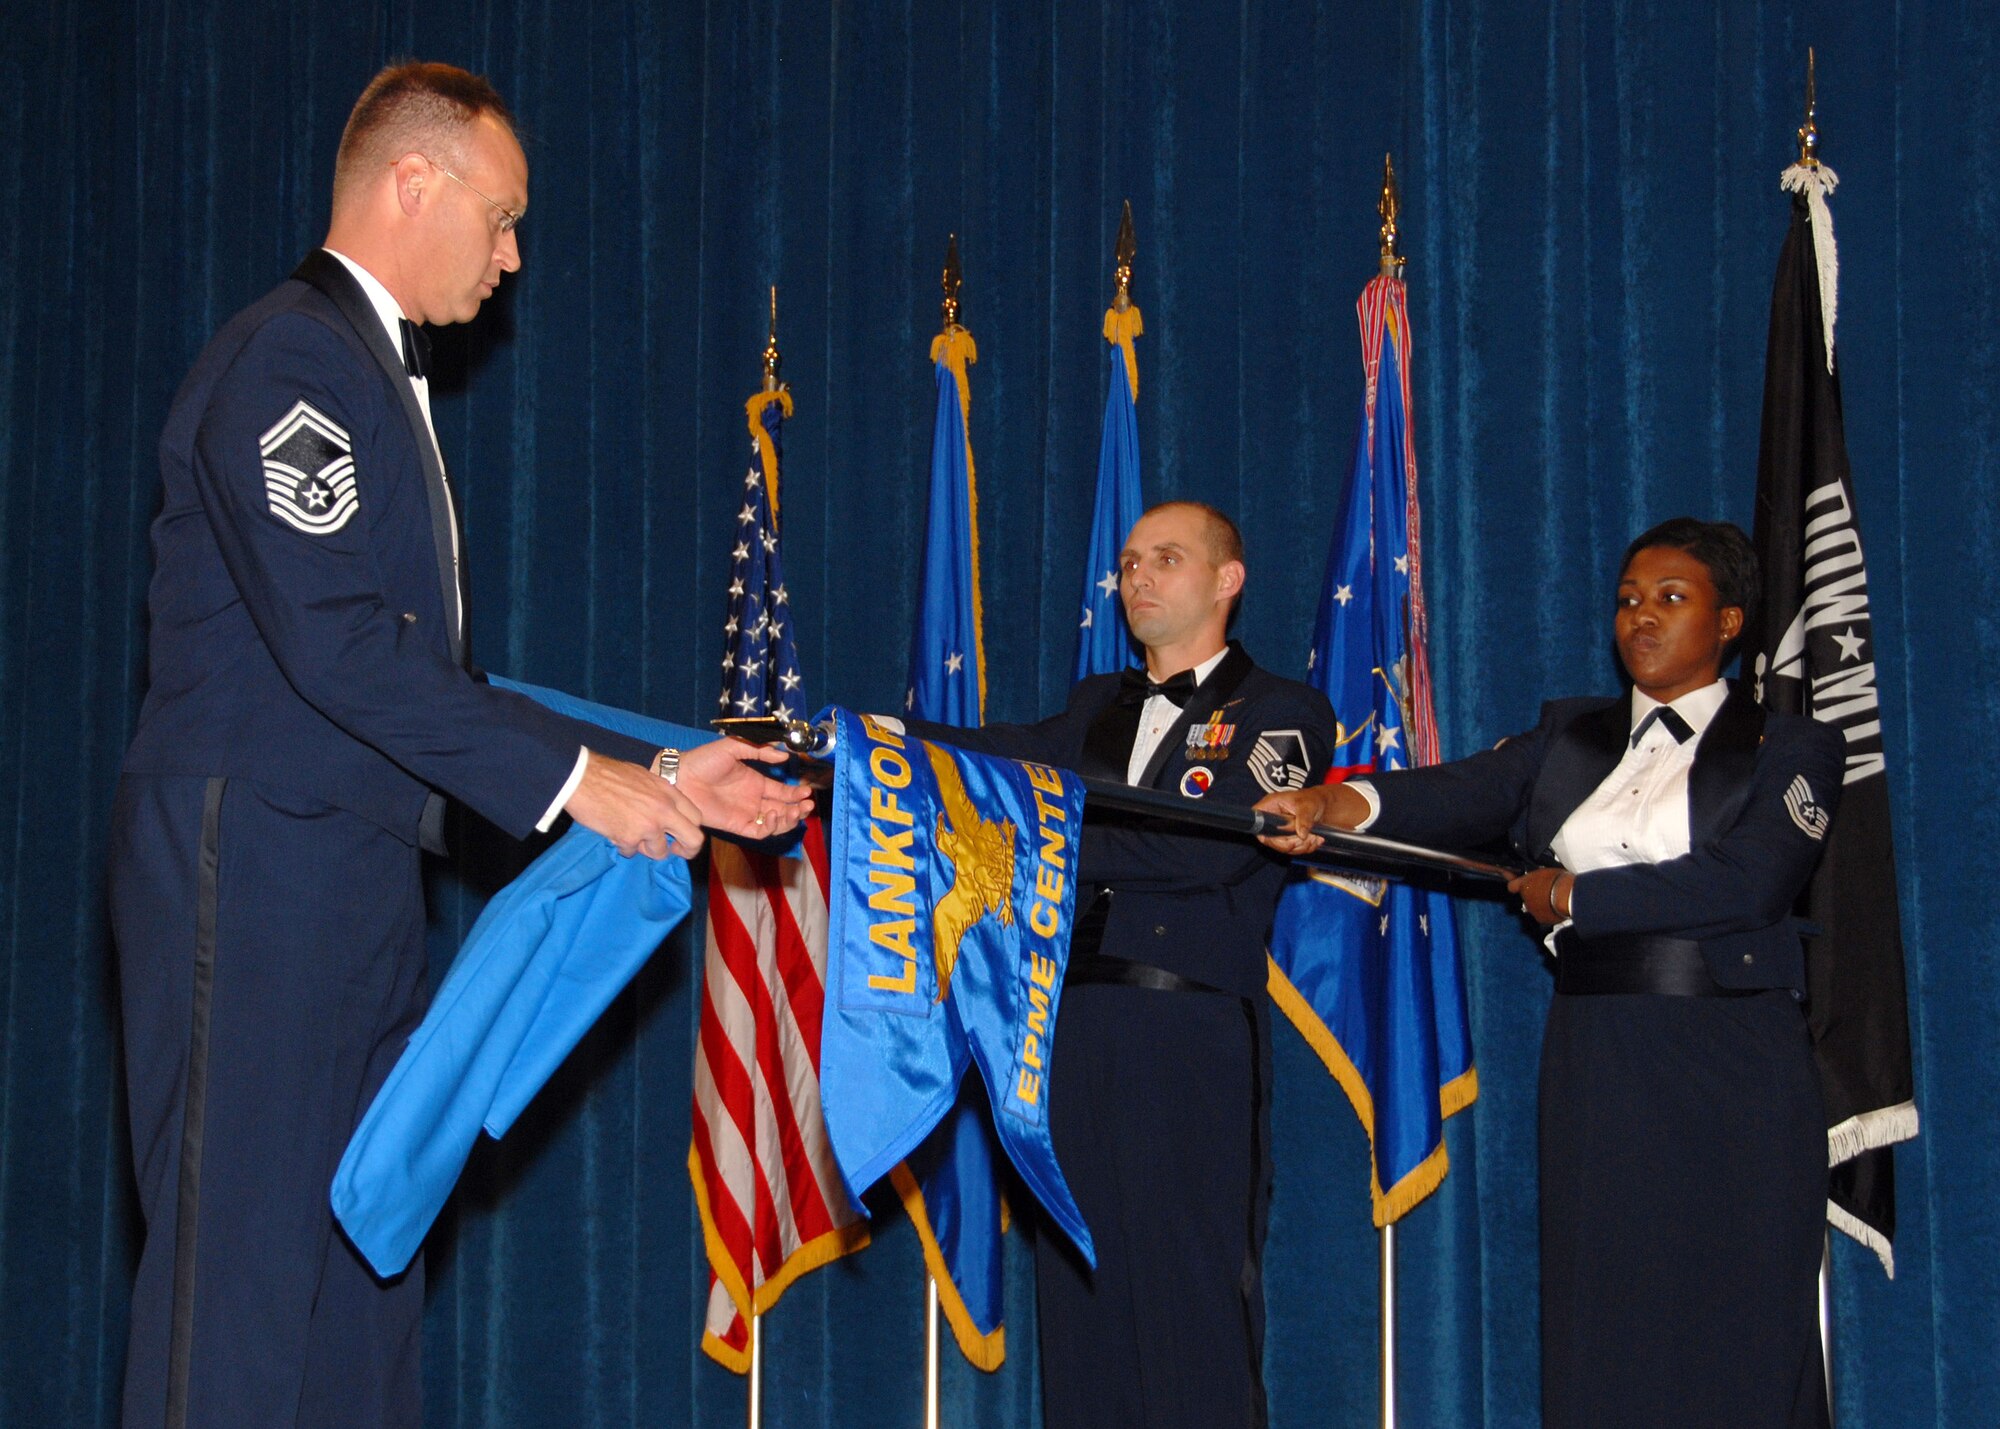 Air National Guard members Senior Master Sgt. Timothy J. Kumes, Master Sgt. Paul G. Rayman, and Tech. Sgt. Jeela S. Matthews perform a guidon exchange ceremony at The I. G. Brown Air National Guard Training and Education Center to signify the transition of the ANG EPME branch to its new name as the Paul H. Lankford Enlisted Professional Military Education Center December 16, 2008. (U.S. Air Force Photo by Master Sgt Kurt Skoglund)(Released)